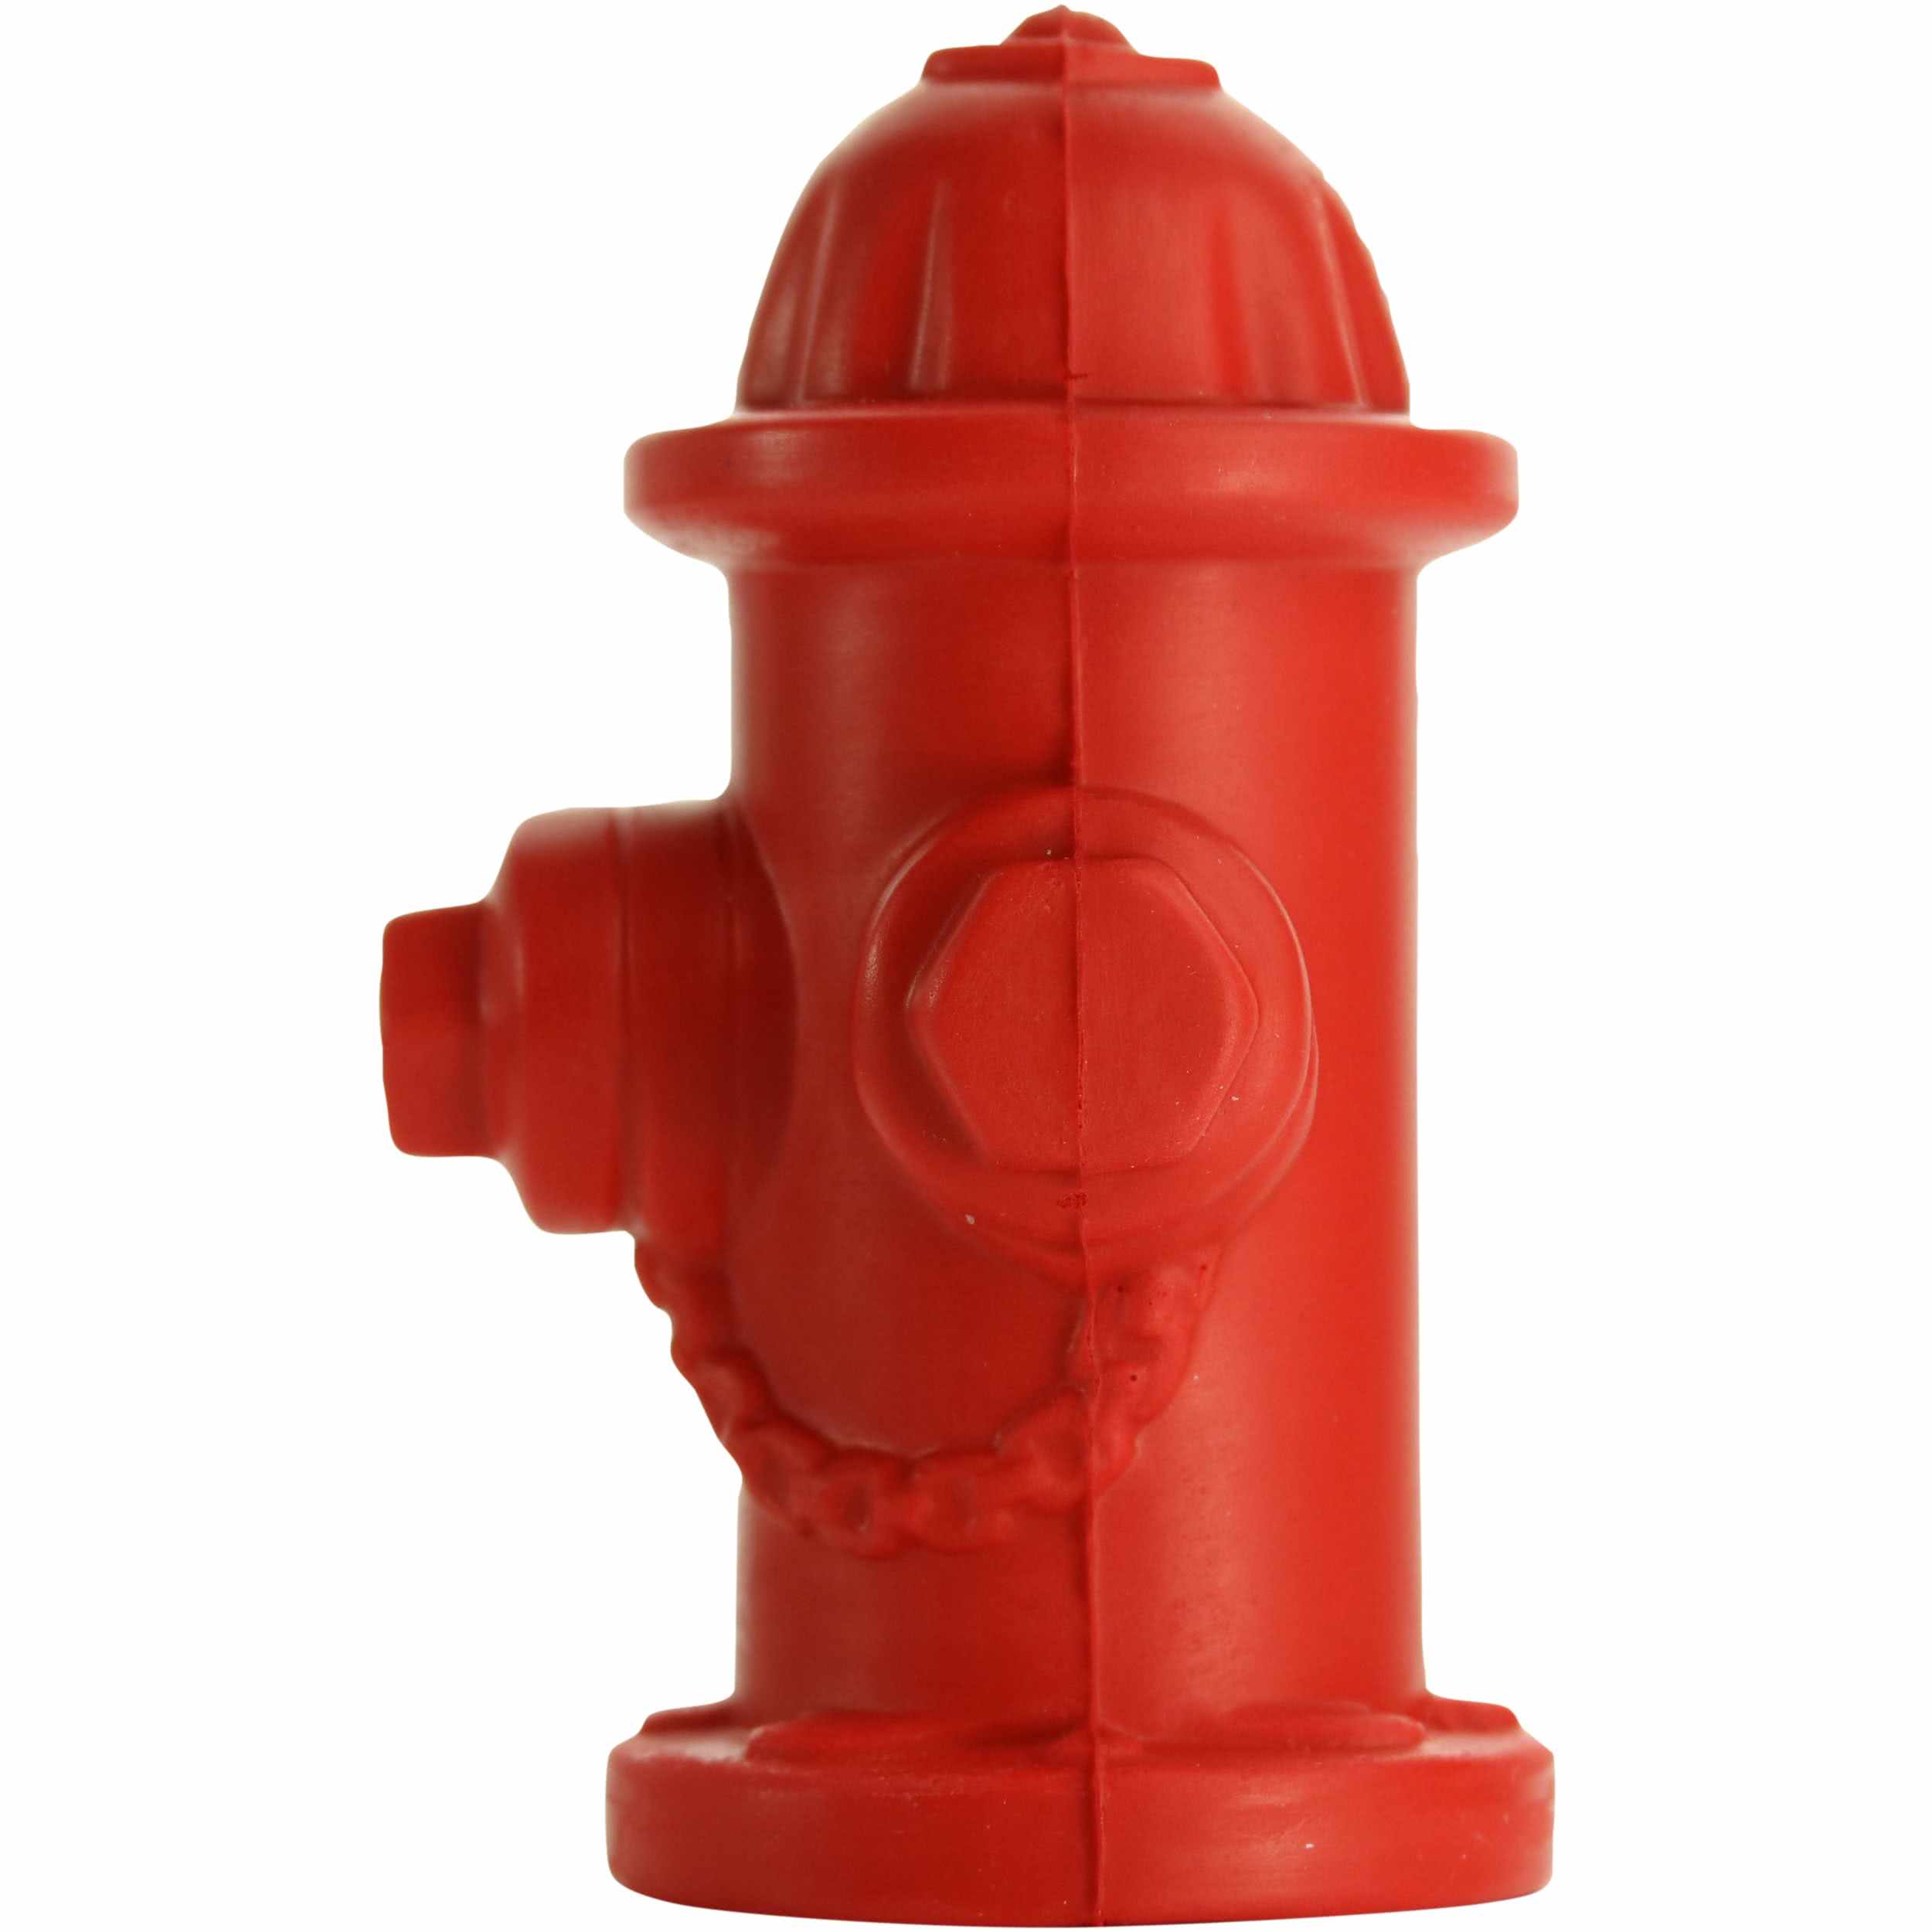 Promotional Fire Hydrant Stress Toys with Custom Logo for $0.91 Ea.